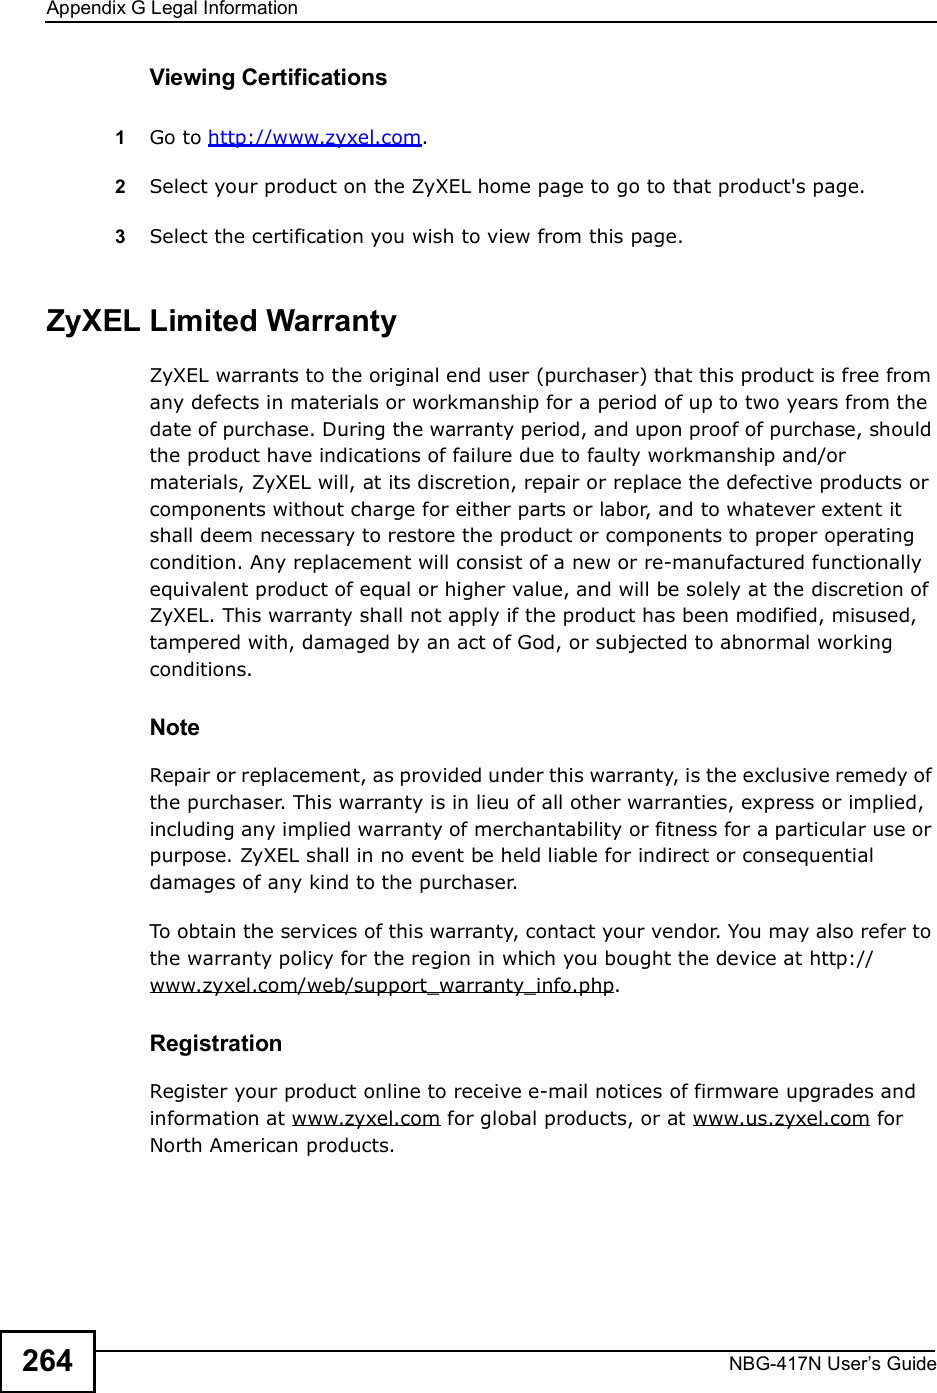 Appendix GLegal InformationNBG-417N User s Guide264Viewing Certifications1Go to http://www.zyxel.com.2Select your product on the ZyXEL home page to go to that product&apos;s page.3Select the certification you wish to view from this page.ZyXEL Limited WarrantyZyXEL warrants to the original end user (purchaser) that this product is free from any defects in materials or workmanship for a period of up to two years from the date of purchase. During the warranty period, and upon proof of purchase, should the product have indications of failure due to faulty workmanship and/or materials, ZyXEL will, at its discretion, repair or replace the defective products or components without charge for either parts or labor, and to whatever extent it shall deem necessary to restore the product or components to proper operating condition. Any replacement will consist of a new or re-manufactured functionally equivalent product of equal or higher value, and will be solely at the discretion of ZyXEL. This warranty shall not apply if the product has been modified, misused, tampered with, damaged by an act of God, or subjected to abnormal working conditions.NoteRepair or replacement, as provided under this warranty, is the exclusive remedy of the purchaser. This warranty is in lieu of all other warranties, express or implied, including any implied warranty of merchantability or fitness for a particular use or purpose. ZyXEL shall in no event be held liable for indirect or consequential damages of any kind to the purchaser.To obtain the services of this warranty, contact your vendor. You may also refer to the warranty policy for the region in which you bought the device at http://www.zyxel.com/web/support_warranty_info.php.RegistrationRegister your product online to receive e-mail notices of firmware upgrades and information at www.zyxel.com for global products, or at www.us.zyxel.com for North American products.